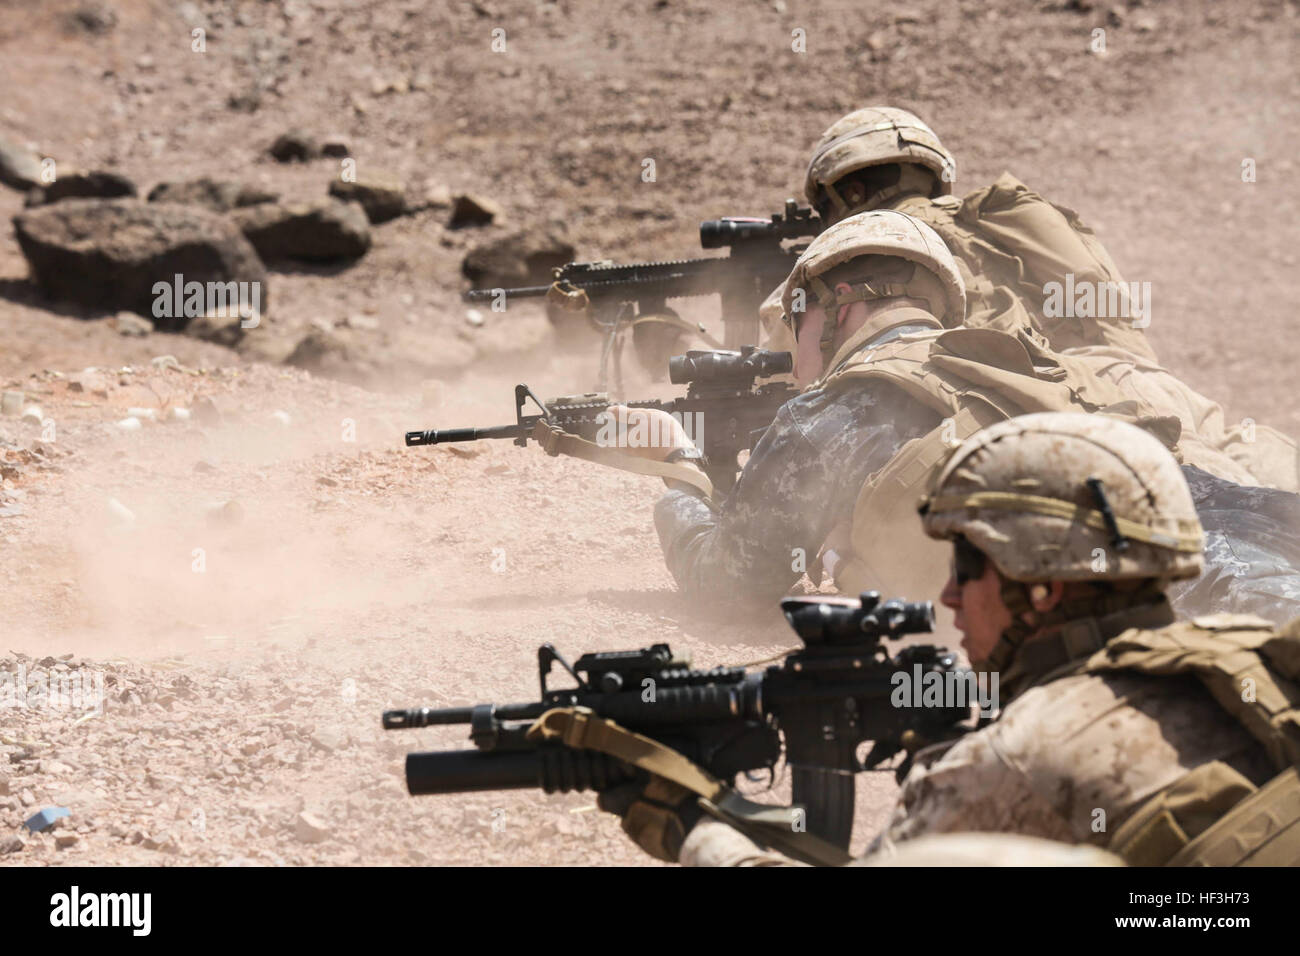 ARTA BEACH, Djibouti (July 22, 2015) U.S. Marines and U.S. Navy Sailors with Battalion Landing Team 3rd Battalion, 1st Marine Regiment, 15th Marine Expeditionary Unit and the USS Anchorage, fire their weapons during a squad-attack exercise.  The Marines of BLT 3/1 executed a series of attack and maneuver drills consisting of, machine gun, squad and night attacks.  Elements of the 15th Marine Expeditionary Unit are ashore in Djibouti for sustainment training to maintain and enhance the skills they developed during their pre-deployment training period.  The 15th MEU is currently deployed in supp Stock Photo